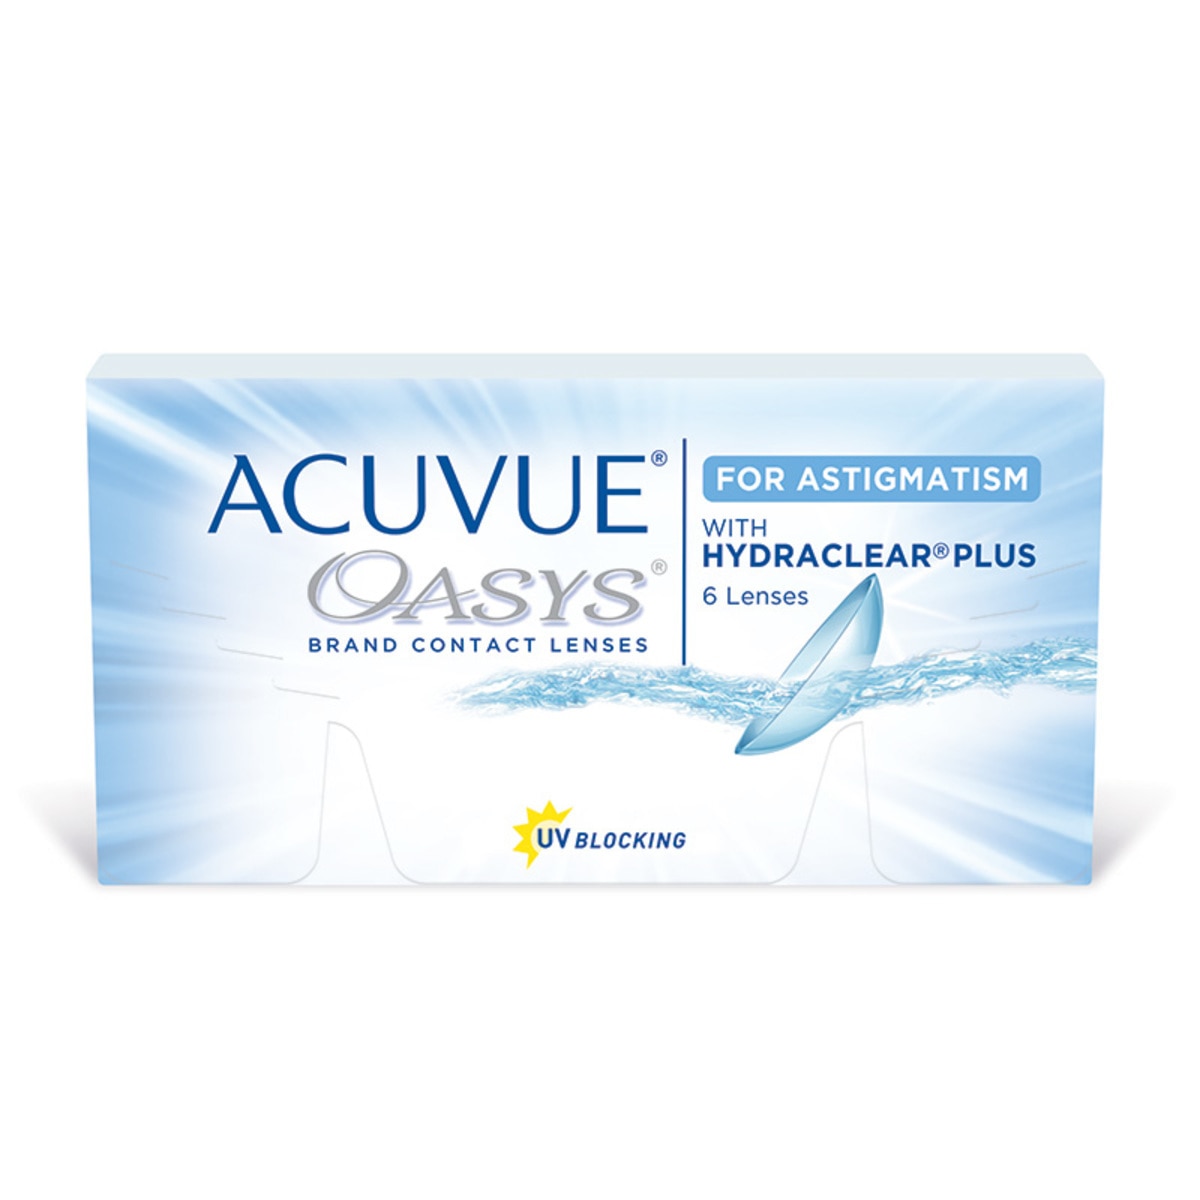 ACUVUE OASYS® con HYDRACLEAR Plus® para Astigmatismo (D -7.5, Cyl/Axis -1.75/80)